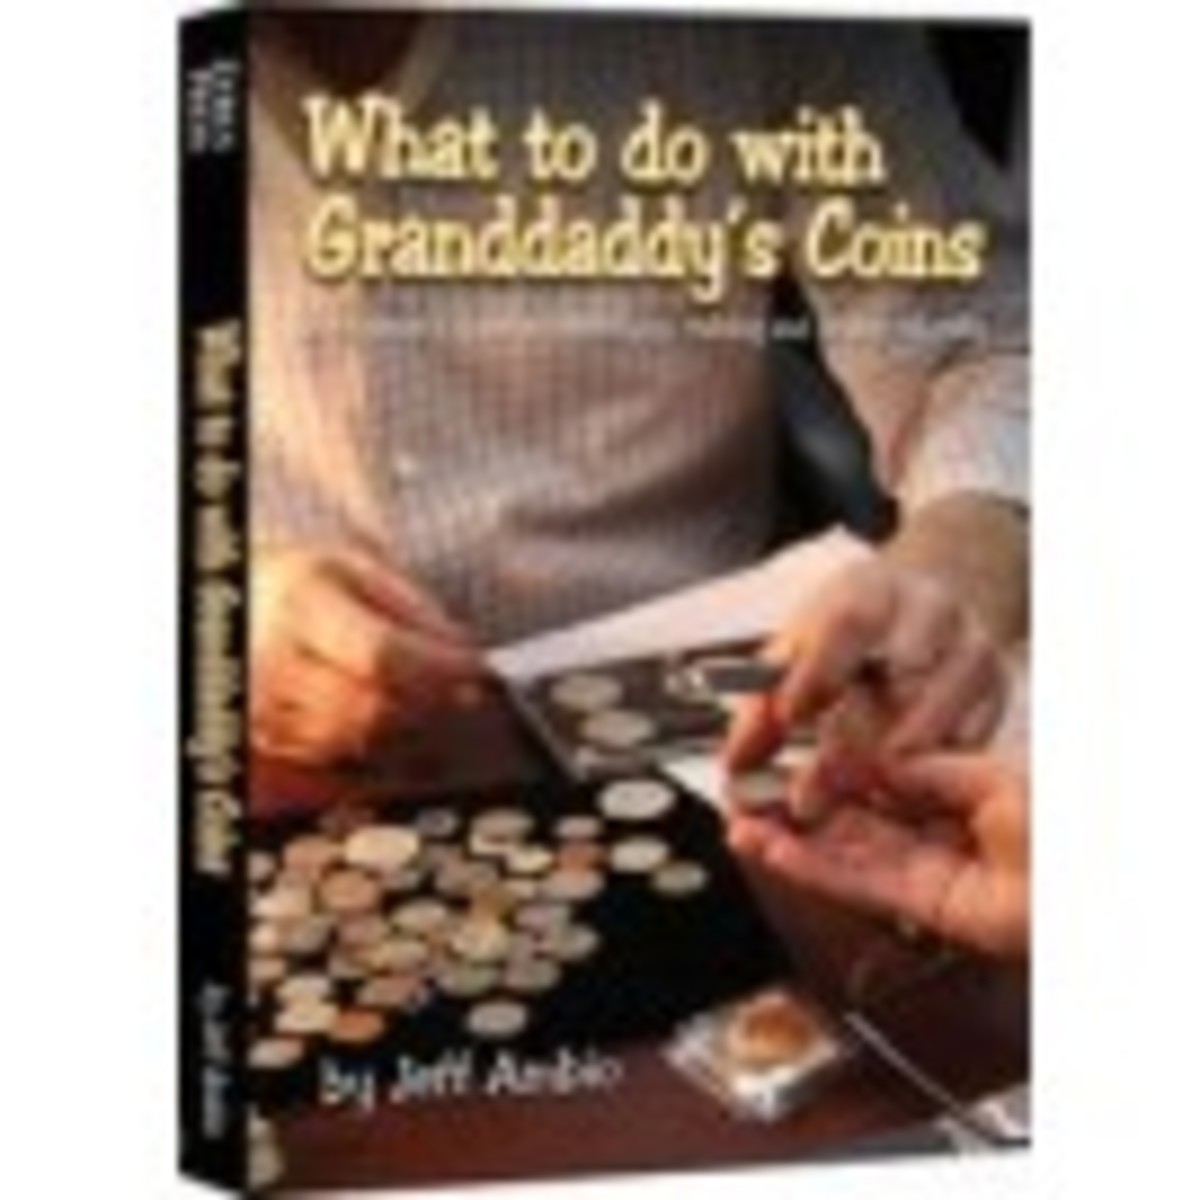 What to do with Granddaddy's Coins